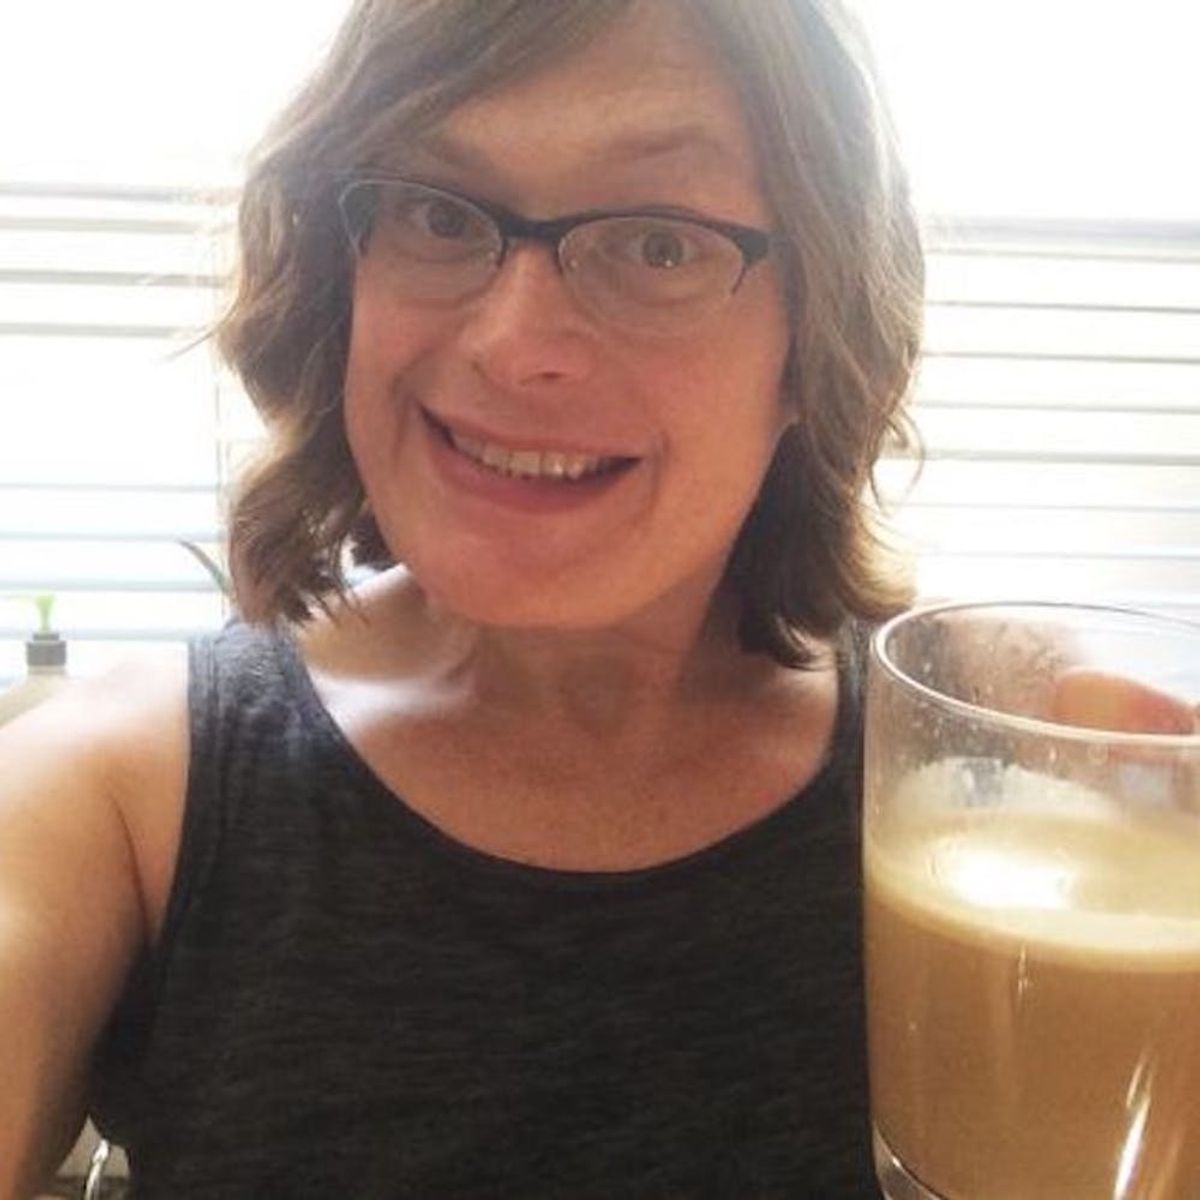 Lilly Wachowski’s Brave Coming Out Story Offers All of Us an Important Lesson